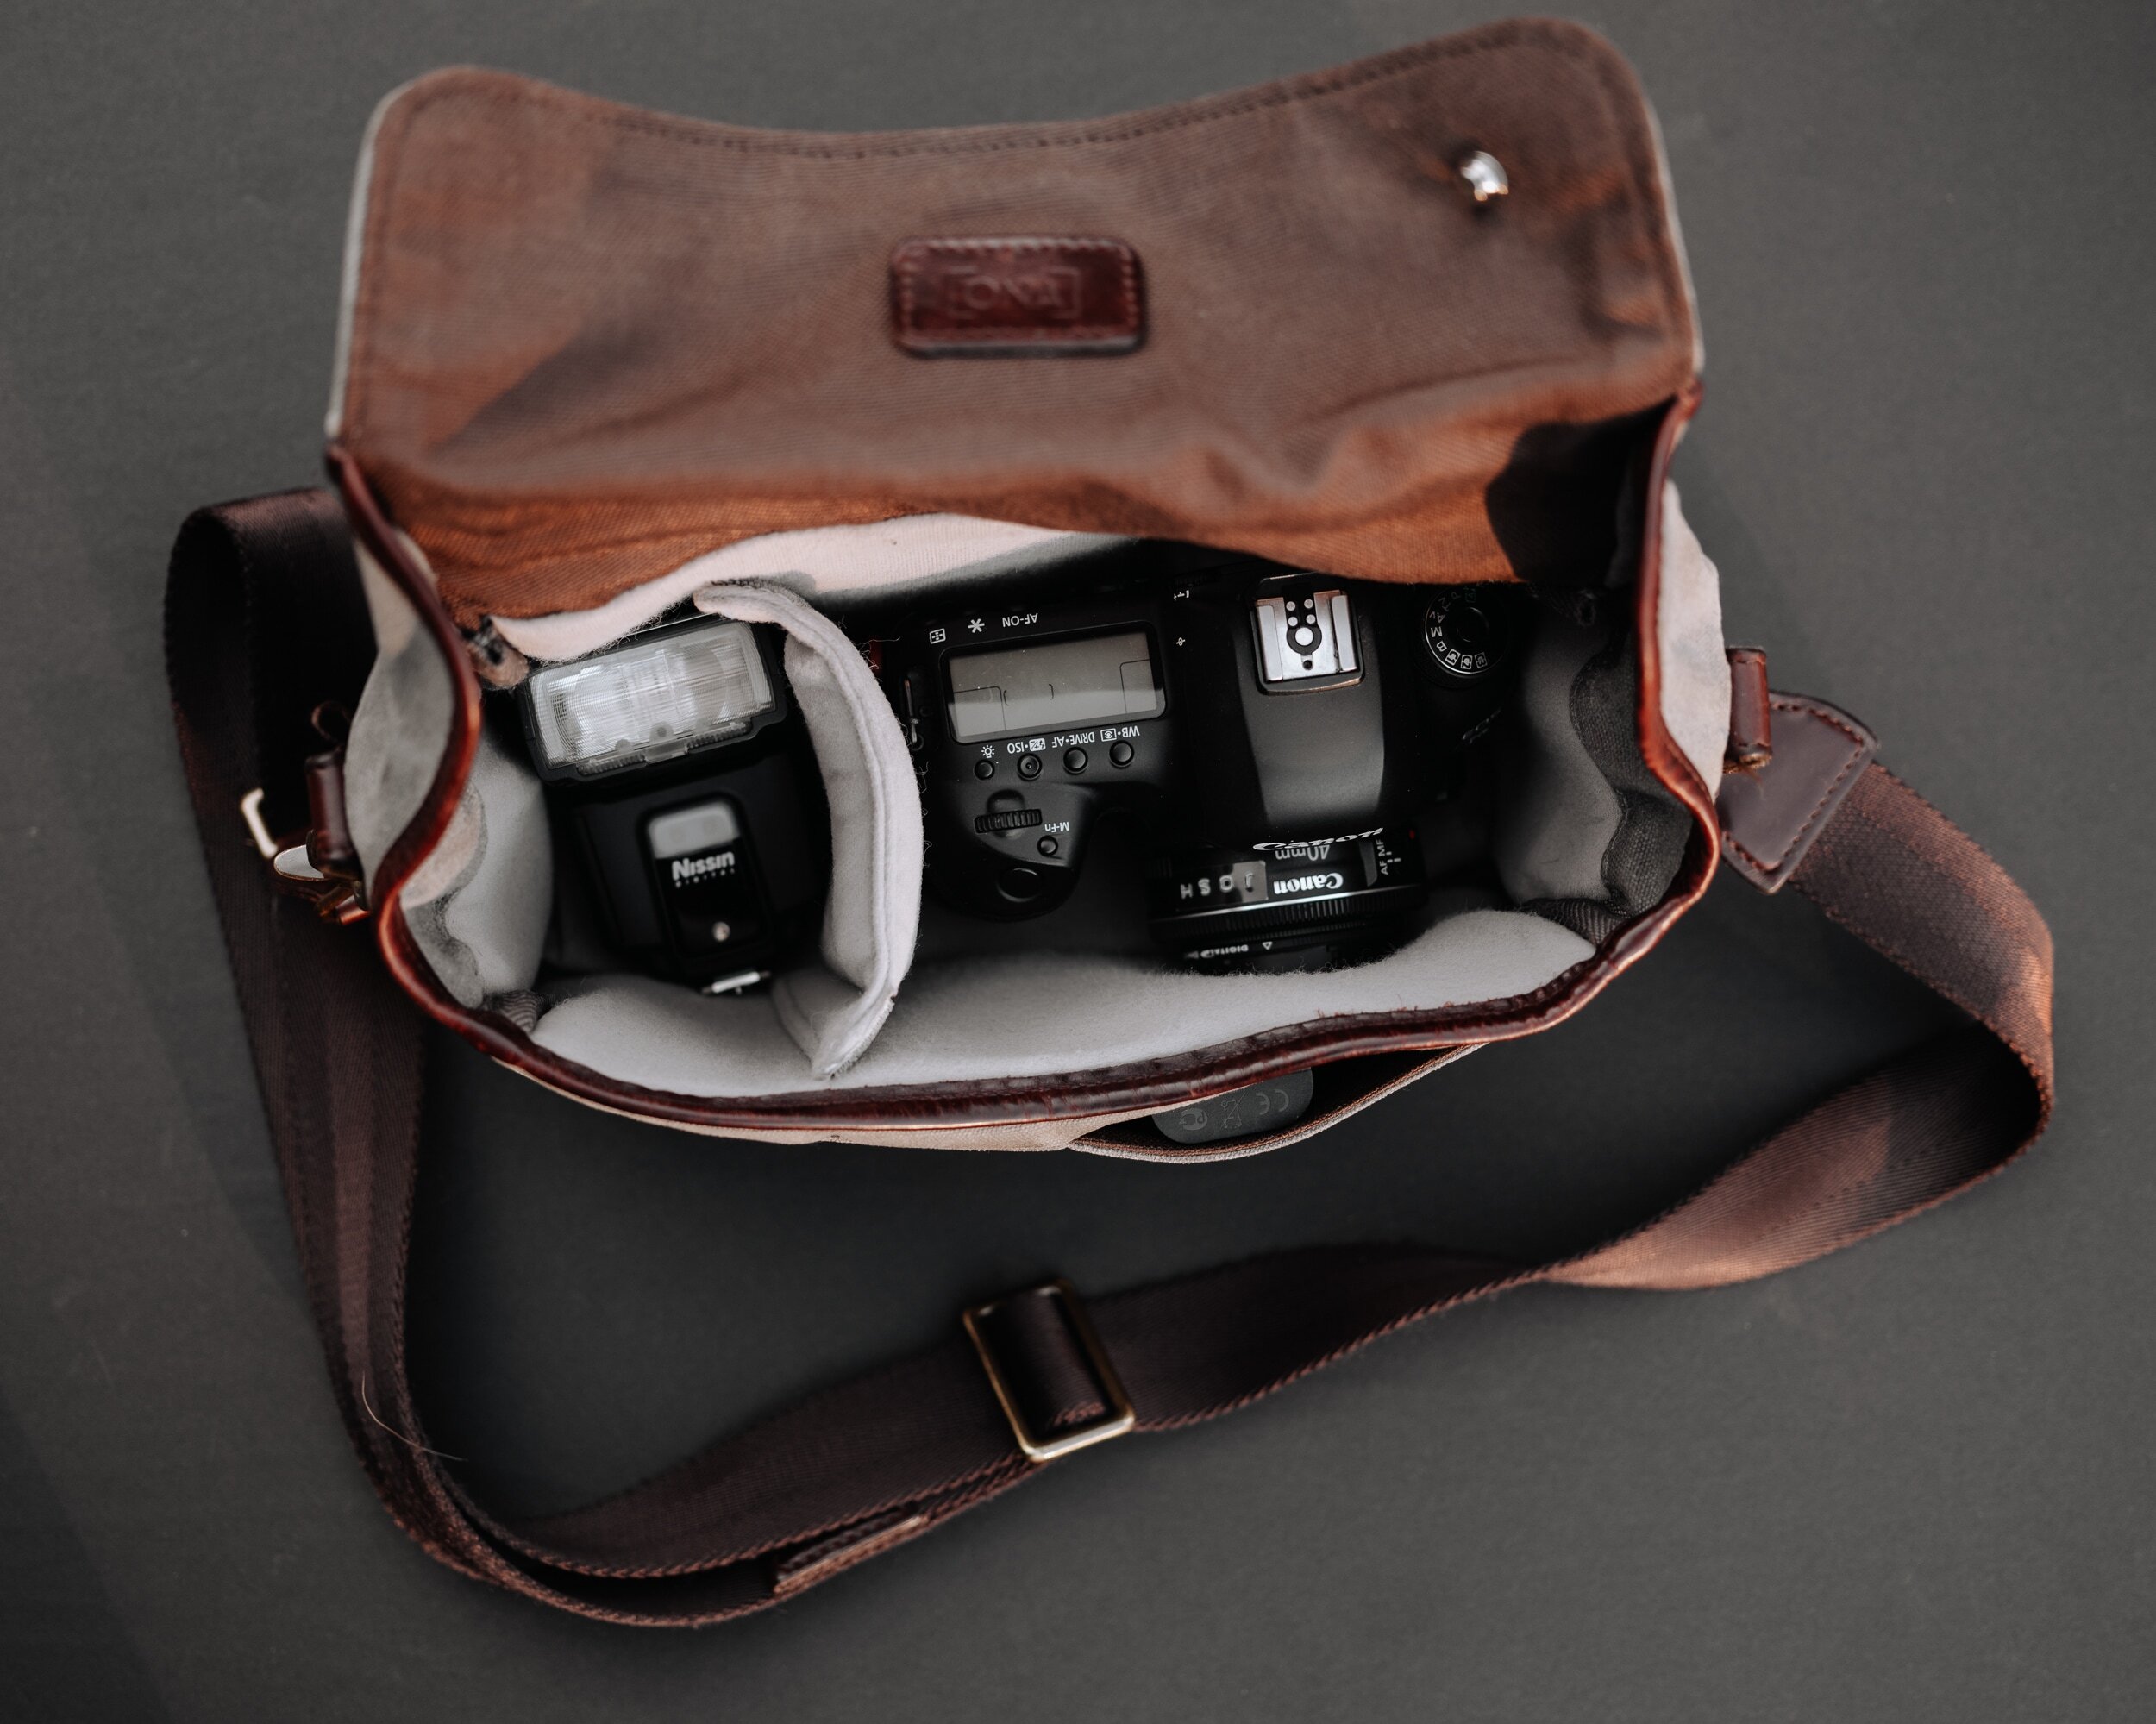 Fstoppers Review: The Absolutely Stunning Leather Union Street Camera Bag  by ONA